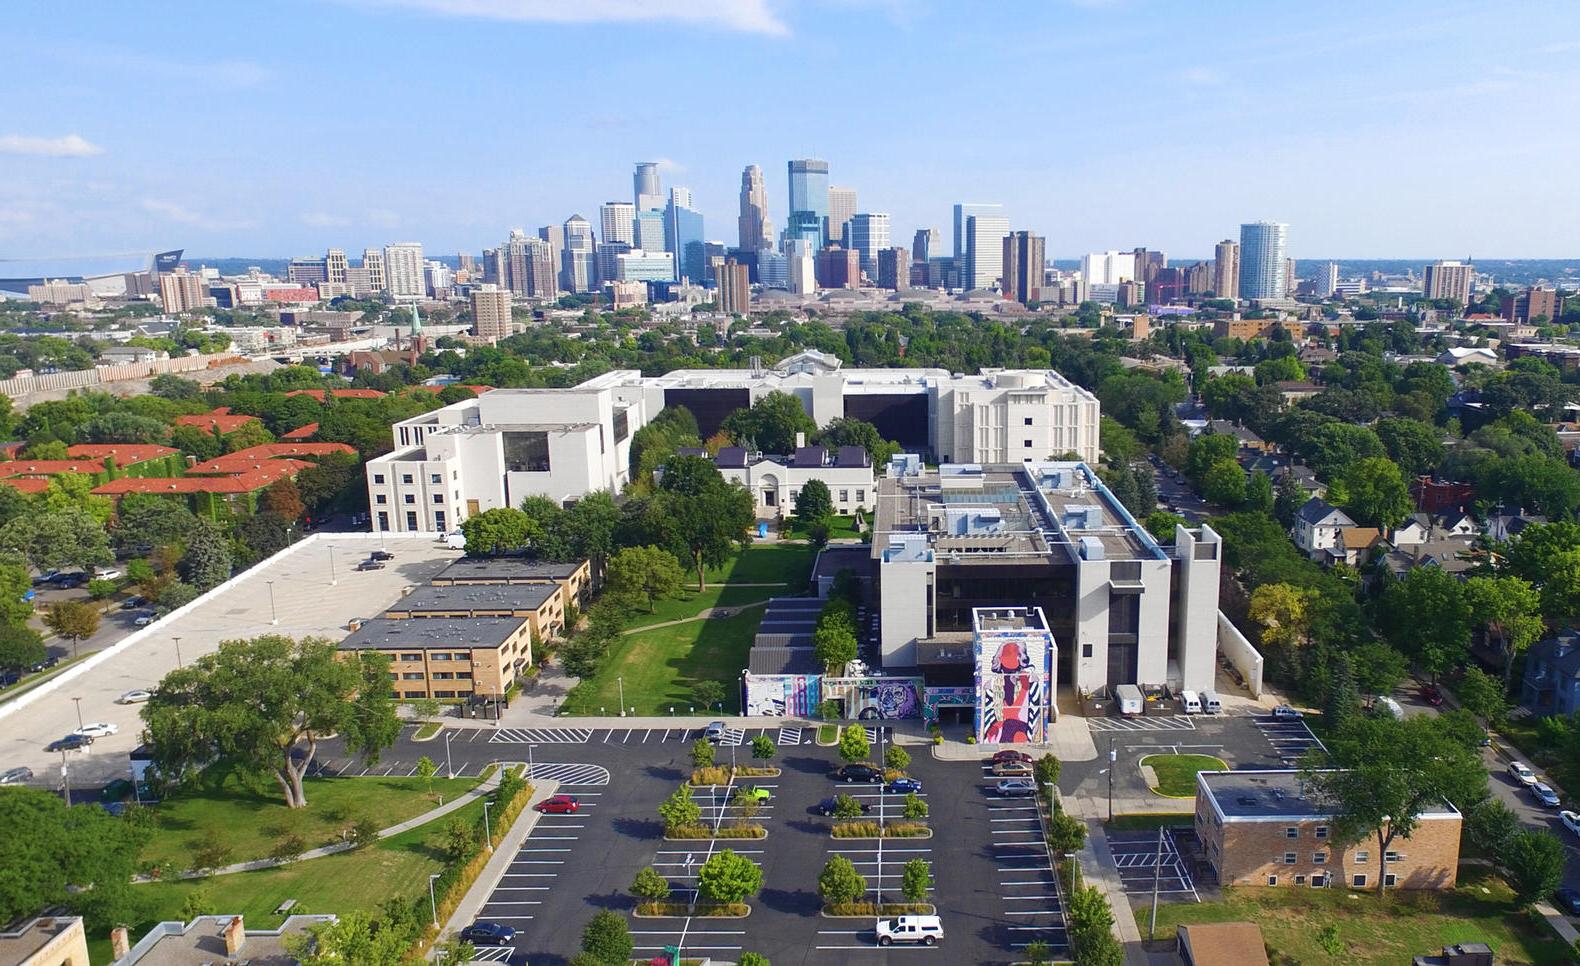 Aerial view of MCAD's campus with Mia and the minneapolis skyline in the background